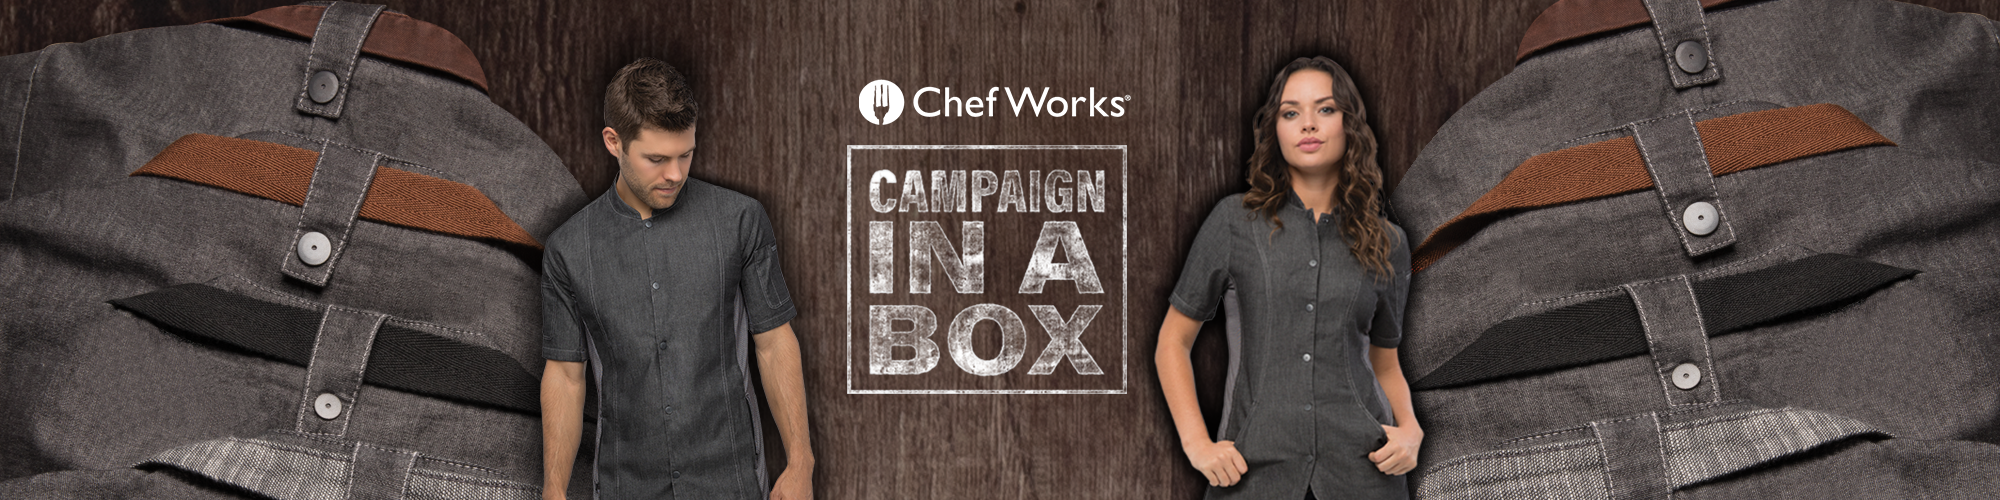 Campaign in a Box - Tribeca and Chelsea - Chef Works